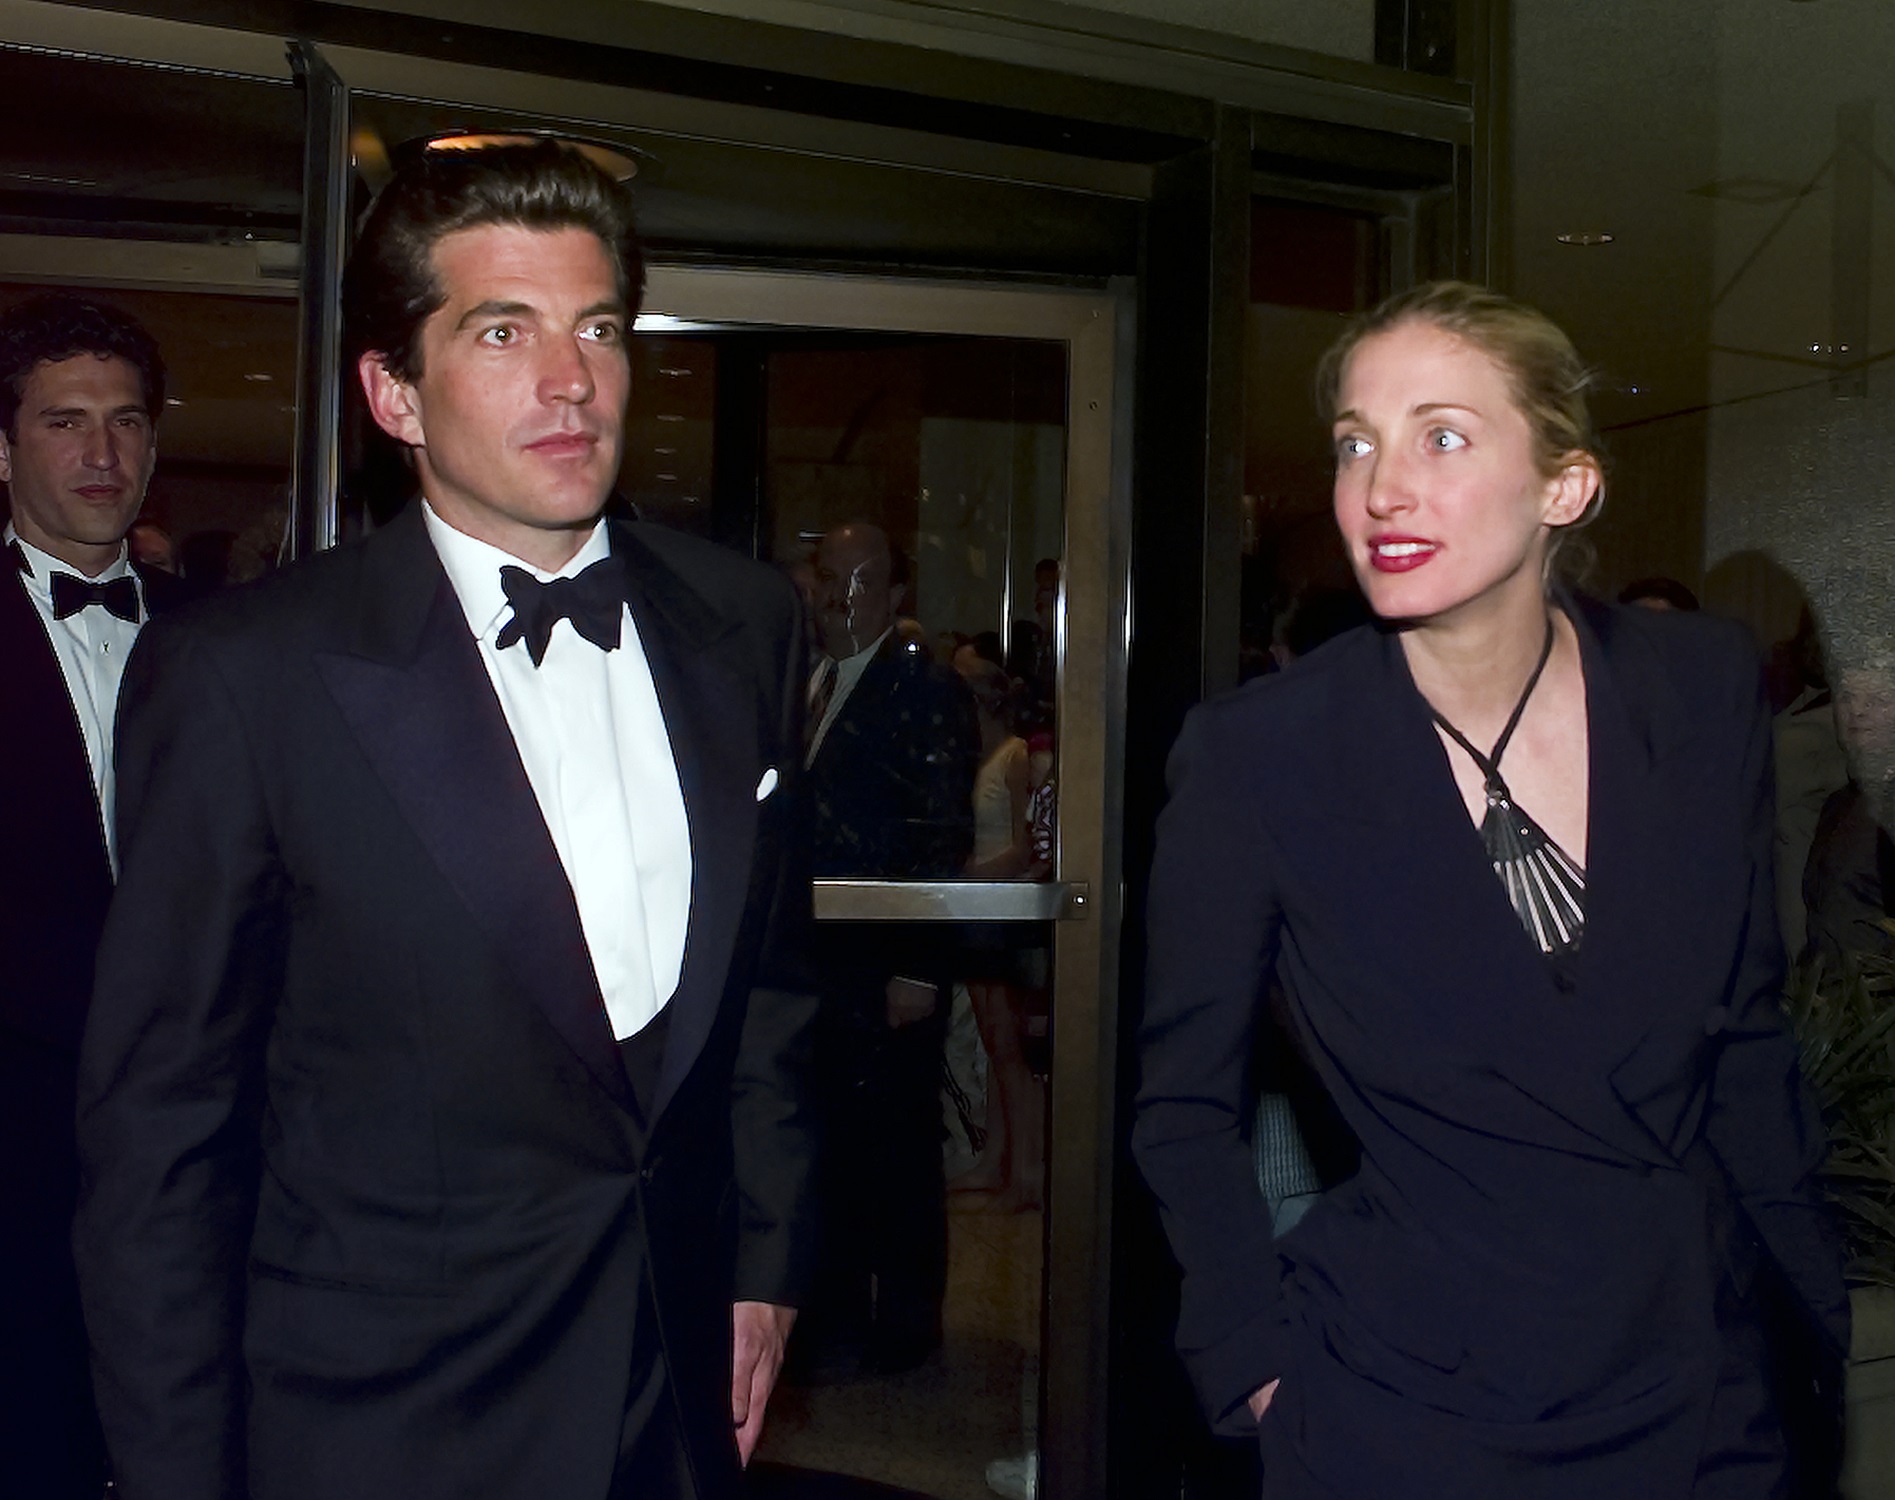 John F. Kennedy Jr. and Carolyn Bessette-Kennedy leaving the White House Correspondents' Dinner in May 1999